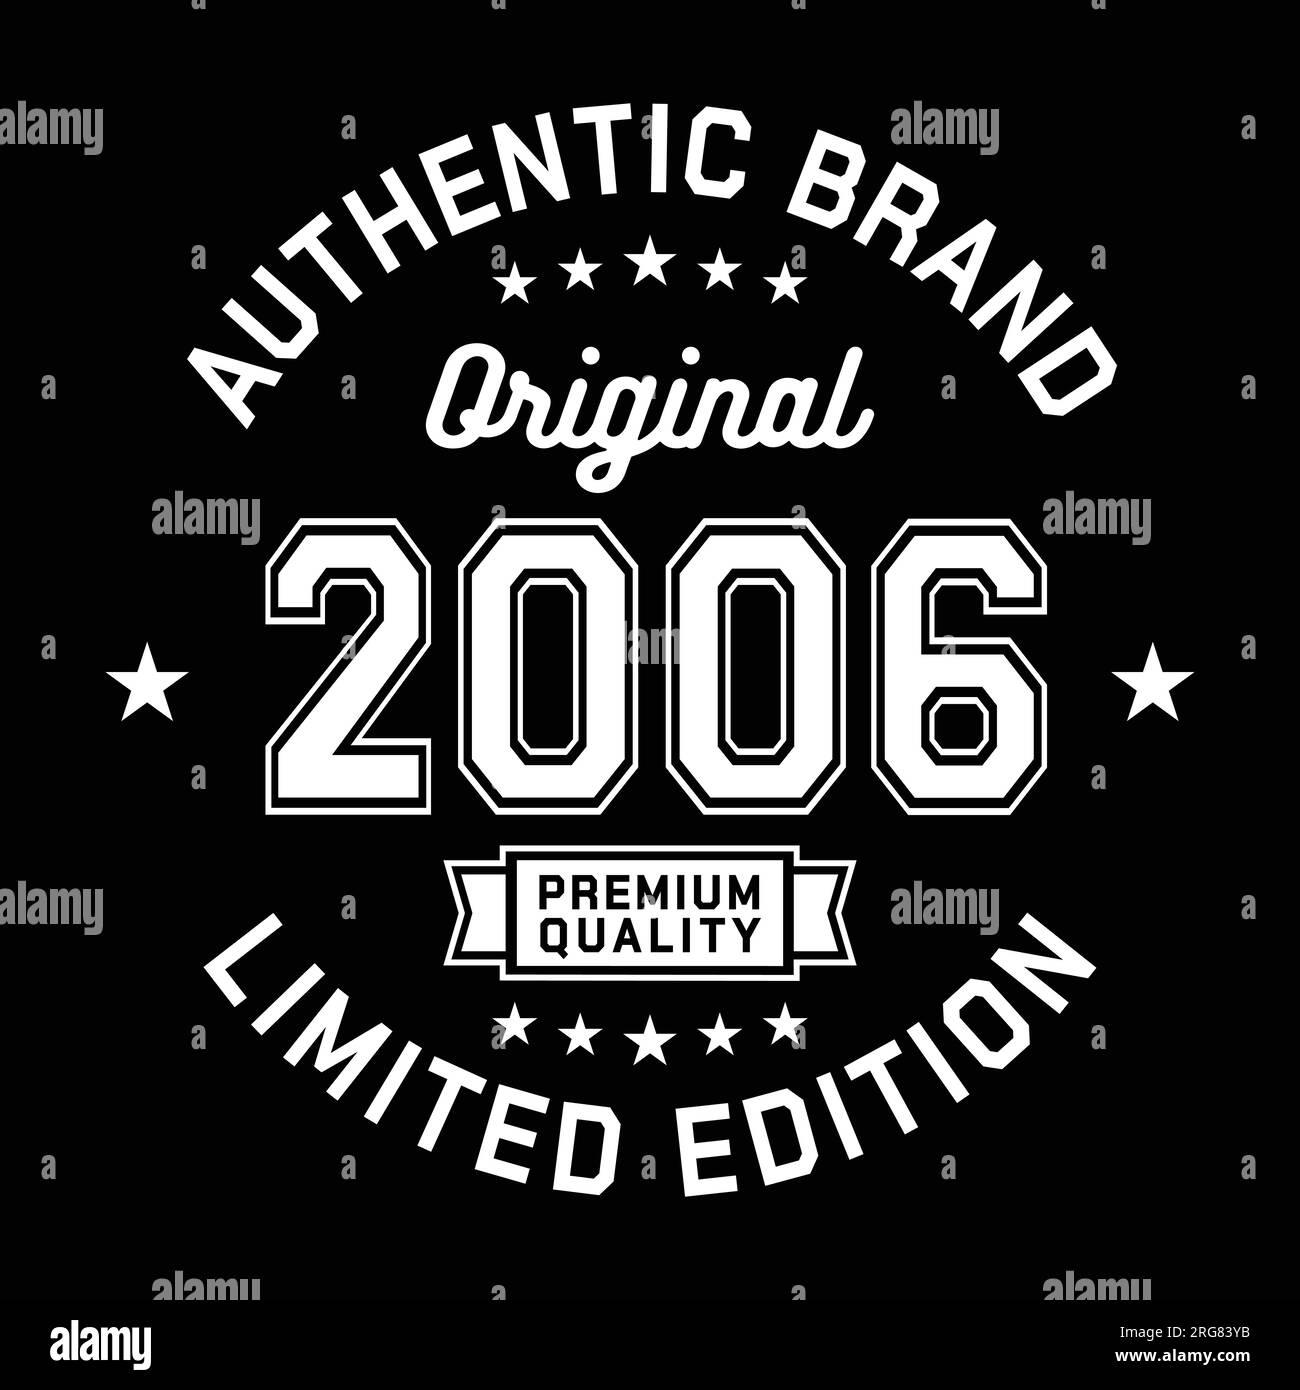 2006 Authentic brand. Apparel fashion design. Graphic design for t-shirt. Vector and illustration. Stock Vector